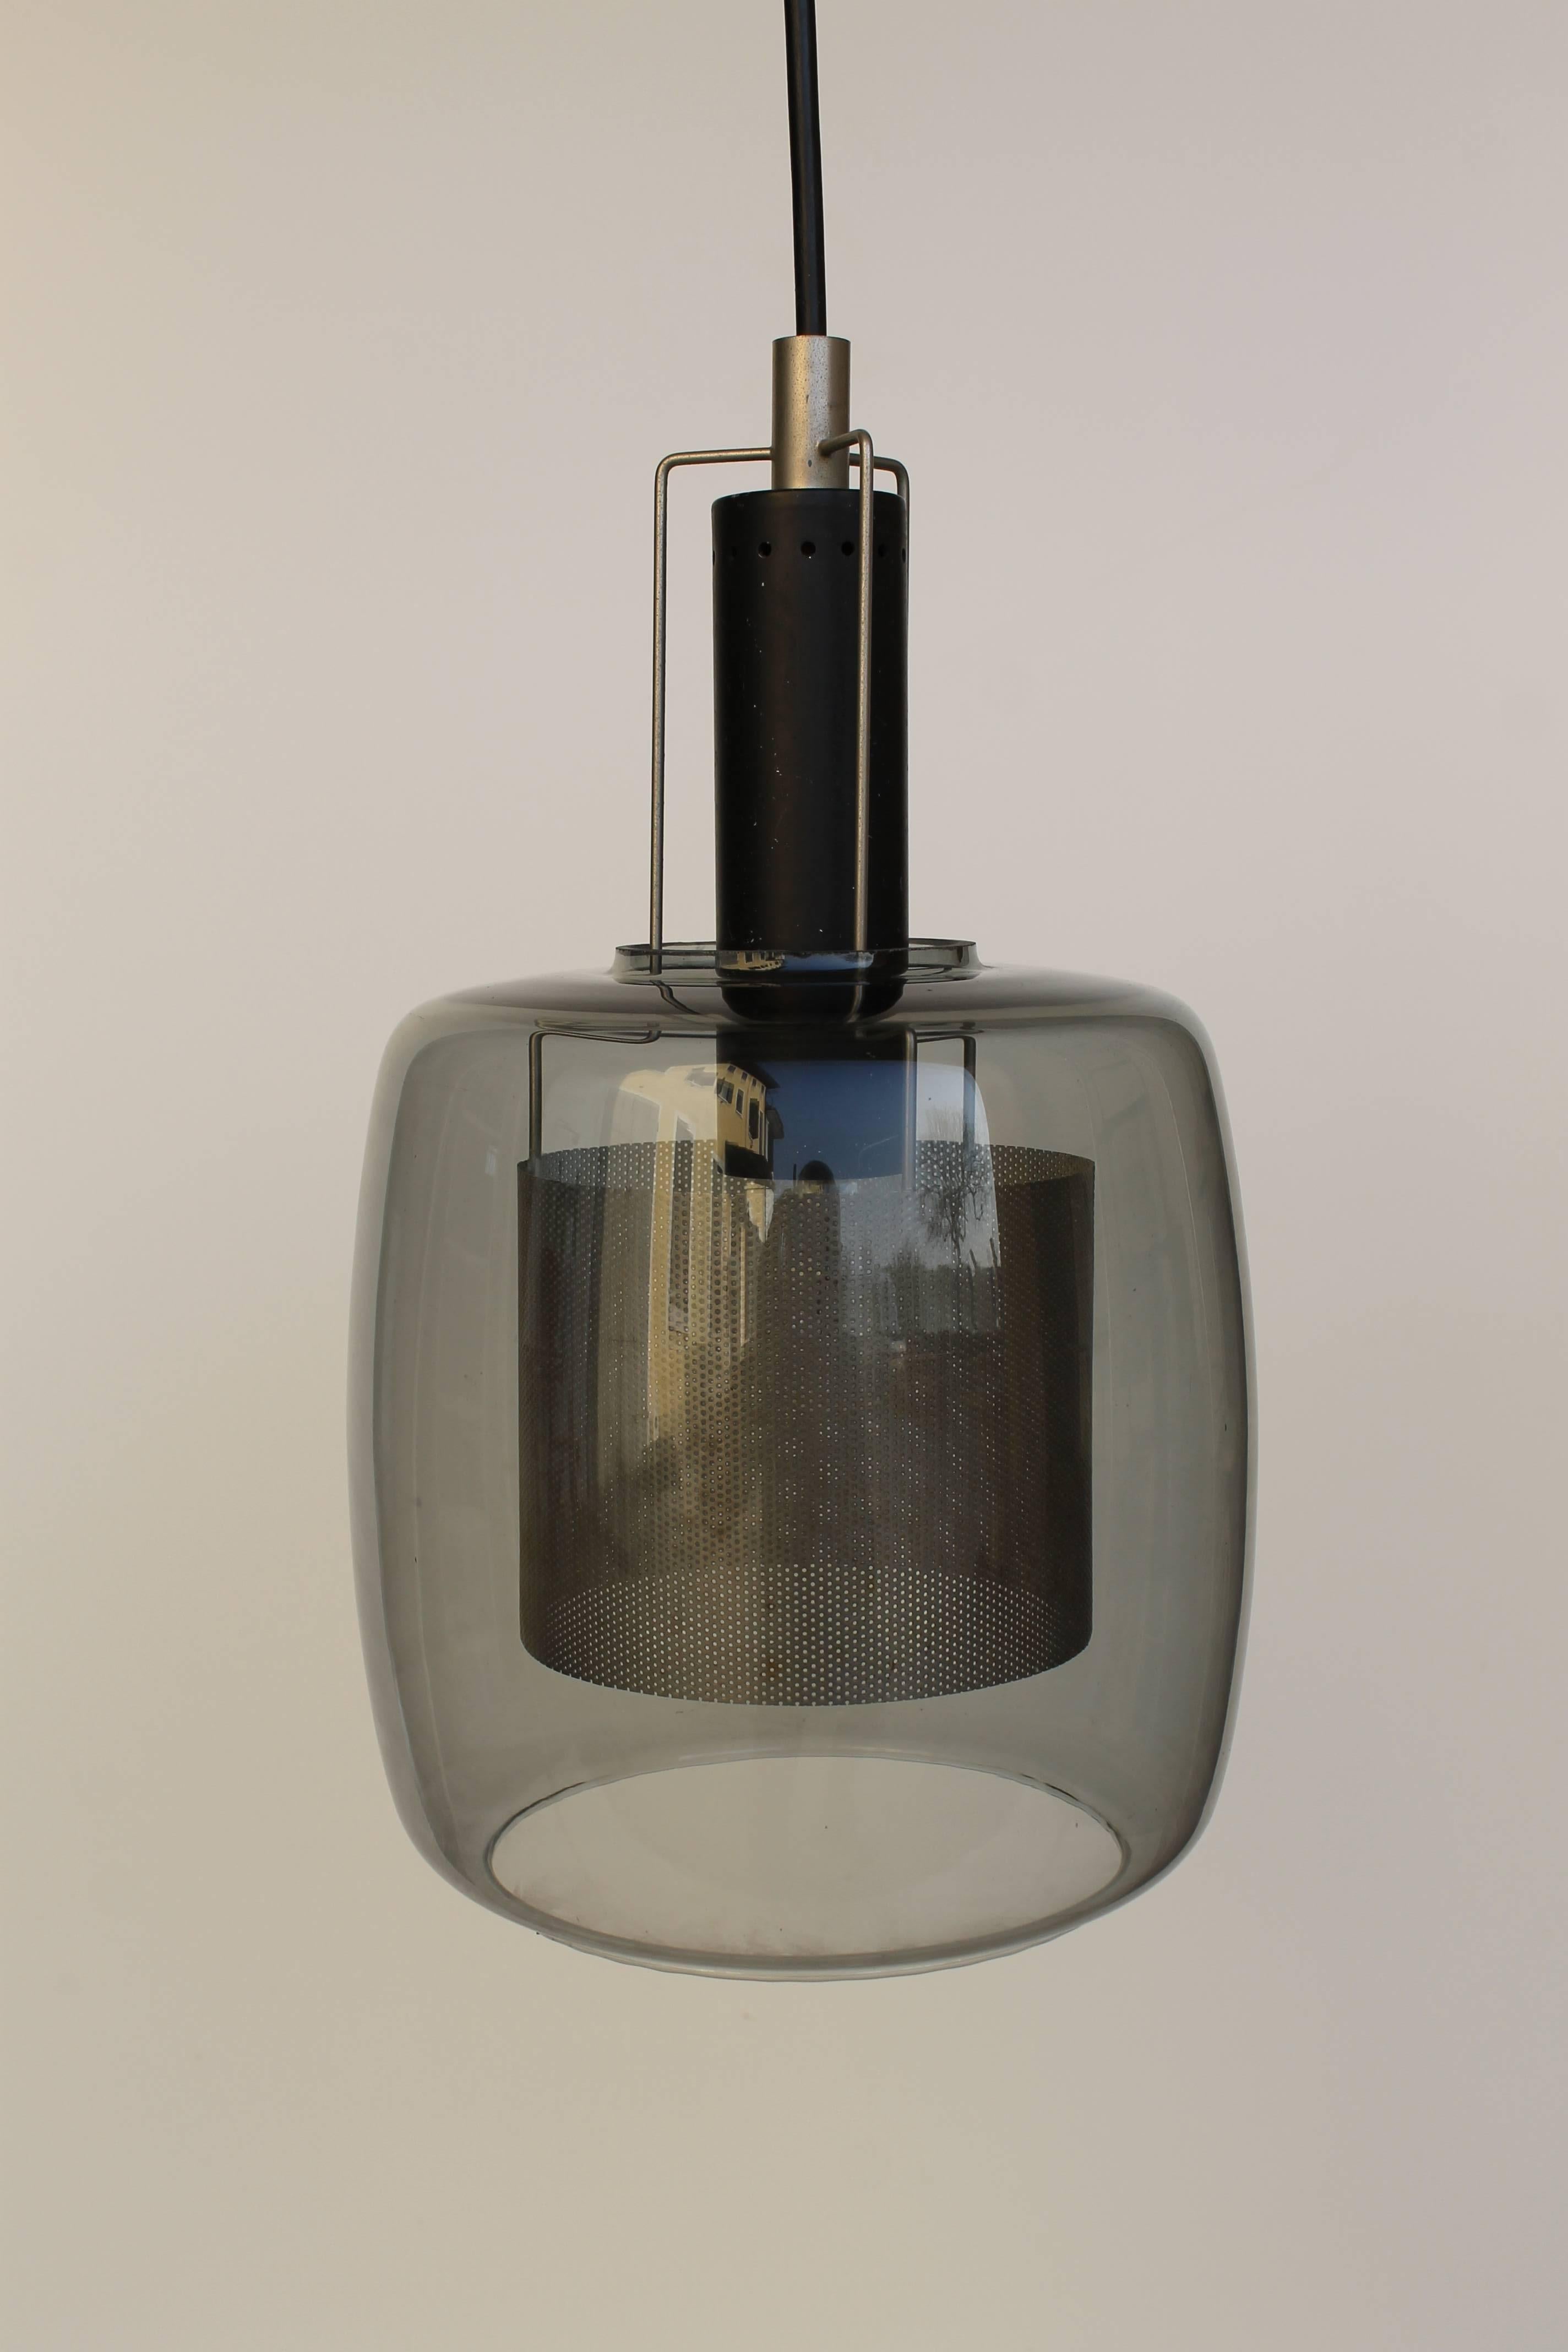 Vintage lamp with a pierced surface and glass bell, circa 1960.